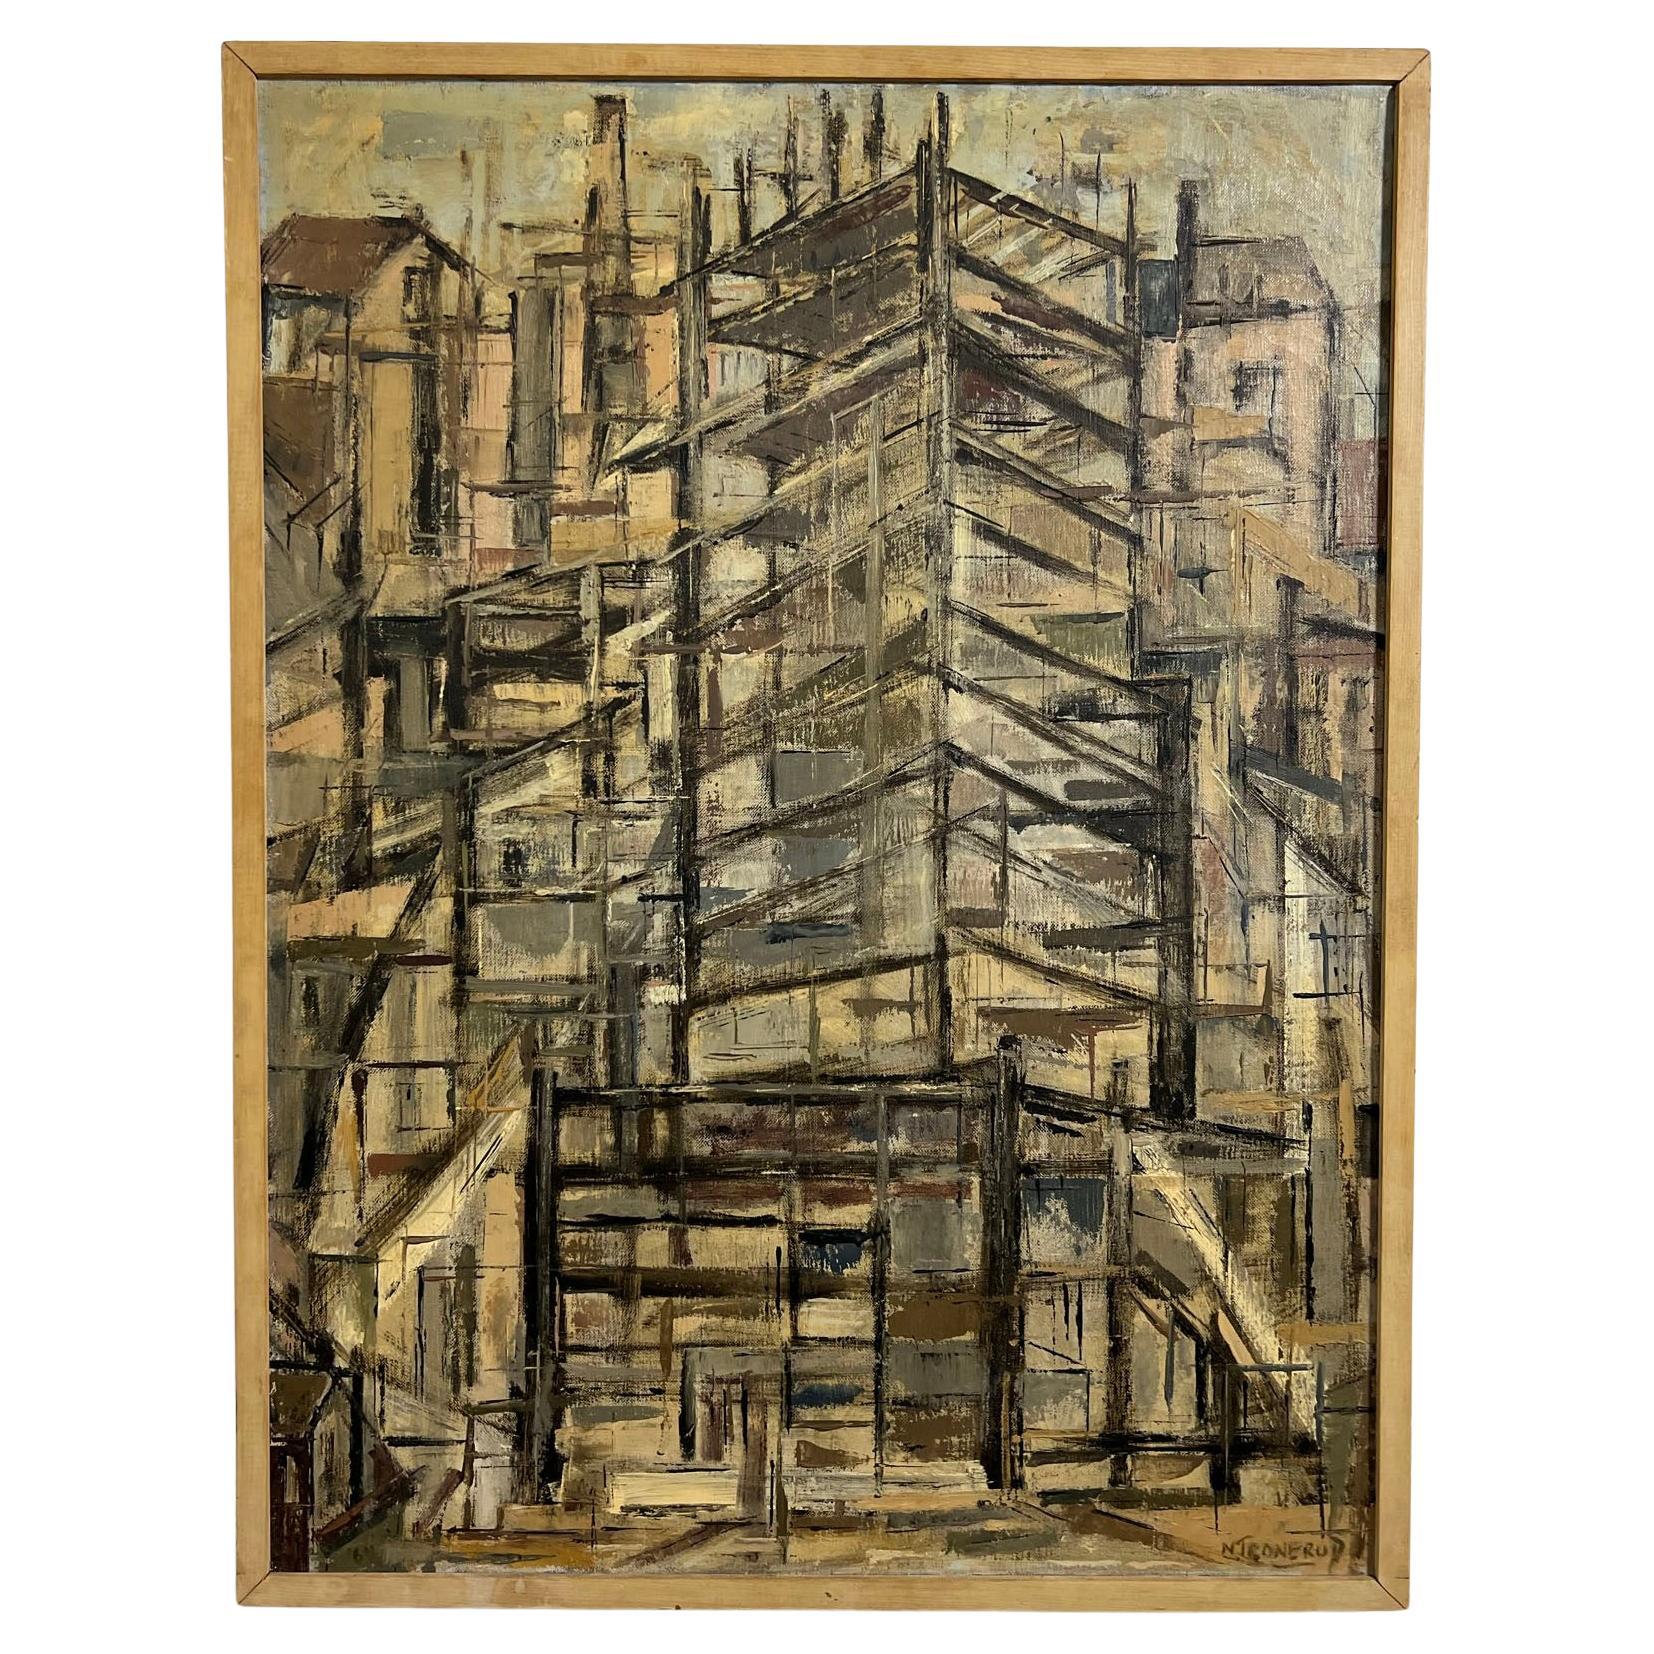 Modernist Architectural Oil Titled "The New City" by Norman Tronerud, D. 1964